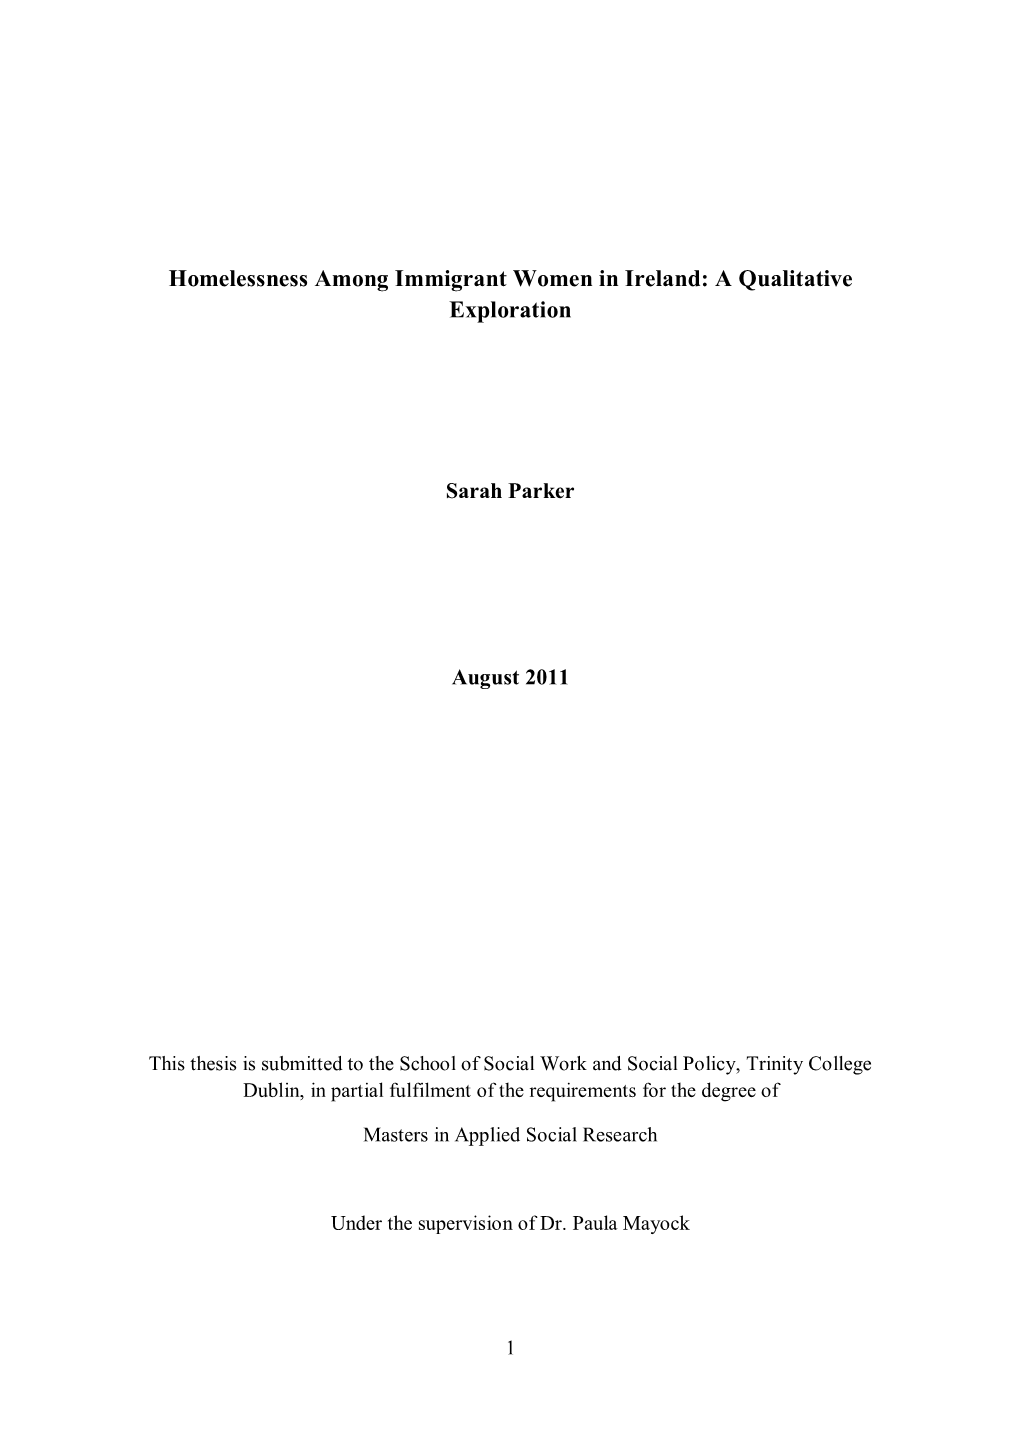 Homelessness Among Immigrant Women in Ireland: a Qualitative Exploration